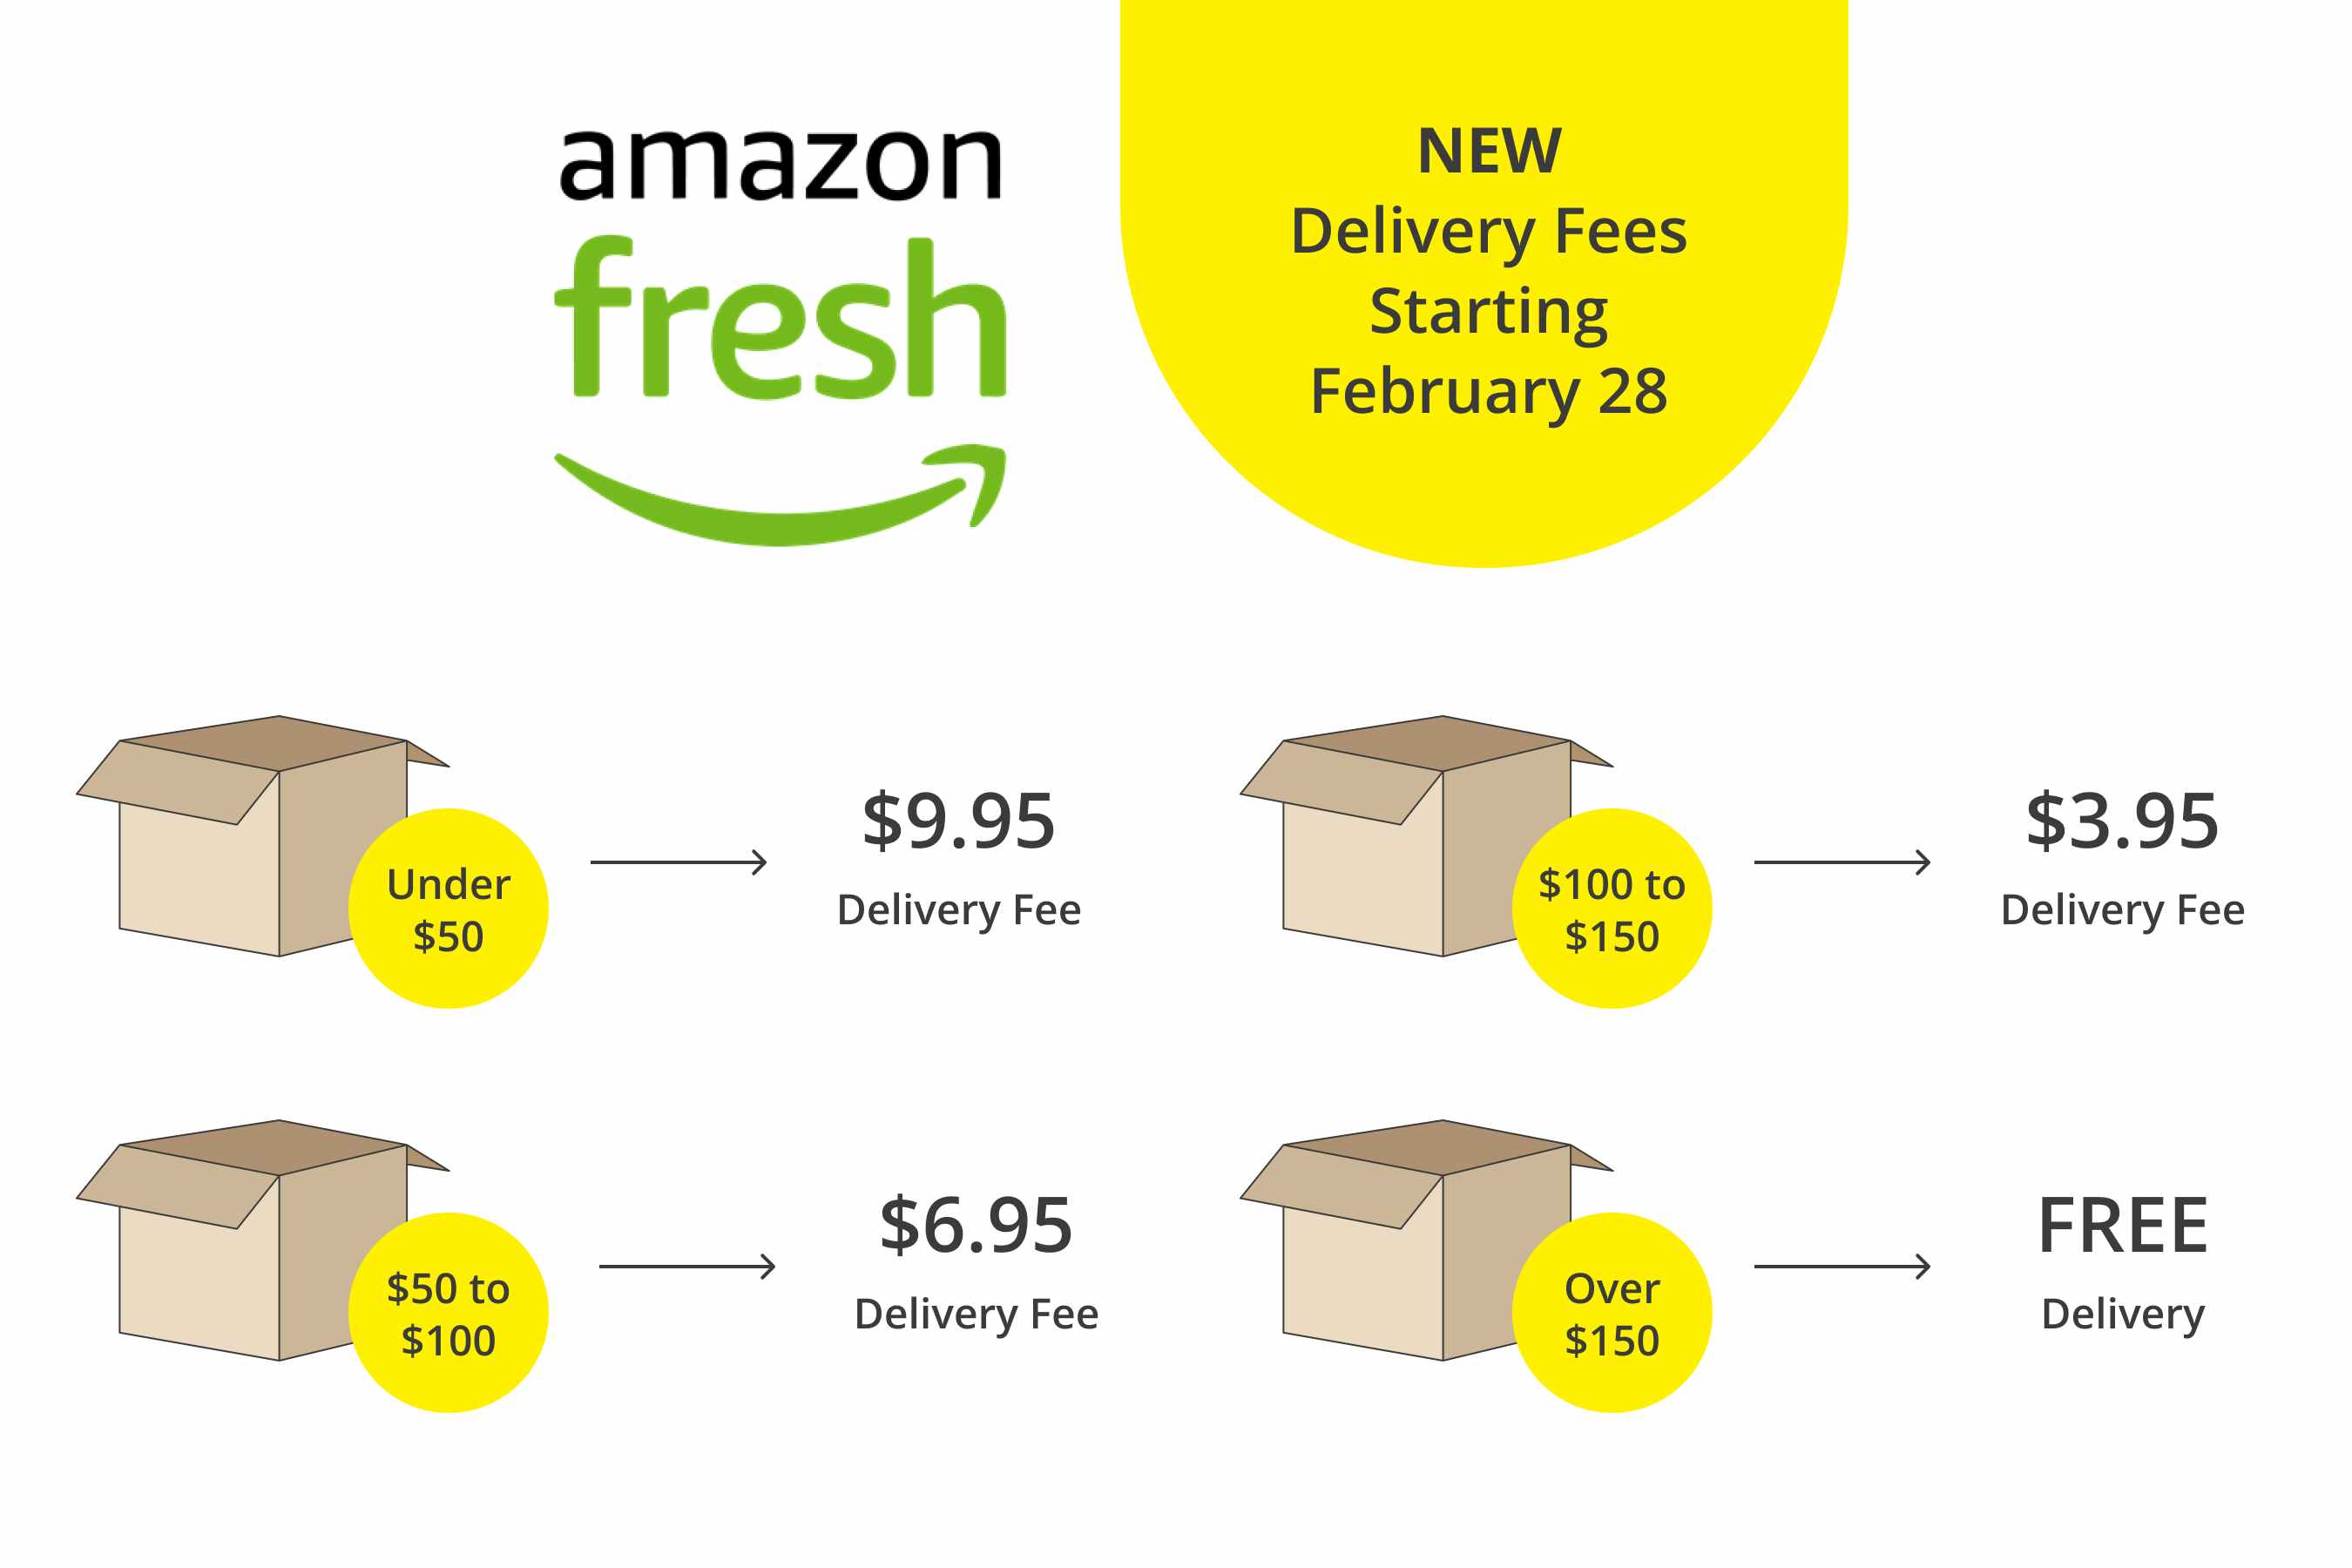 A graphic showing amazon fresh delivery fees starting February 28, 2023: Under $50: $9.95 delivery fee. $50 - $100: $6.95. Delivery fee. $100 - $150: $3.95. Delivery fee Over $150: Free.